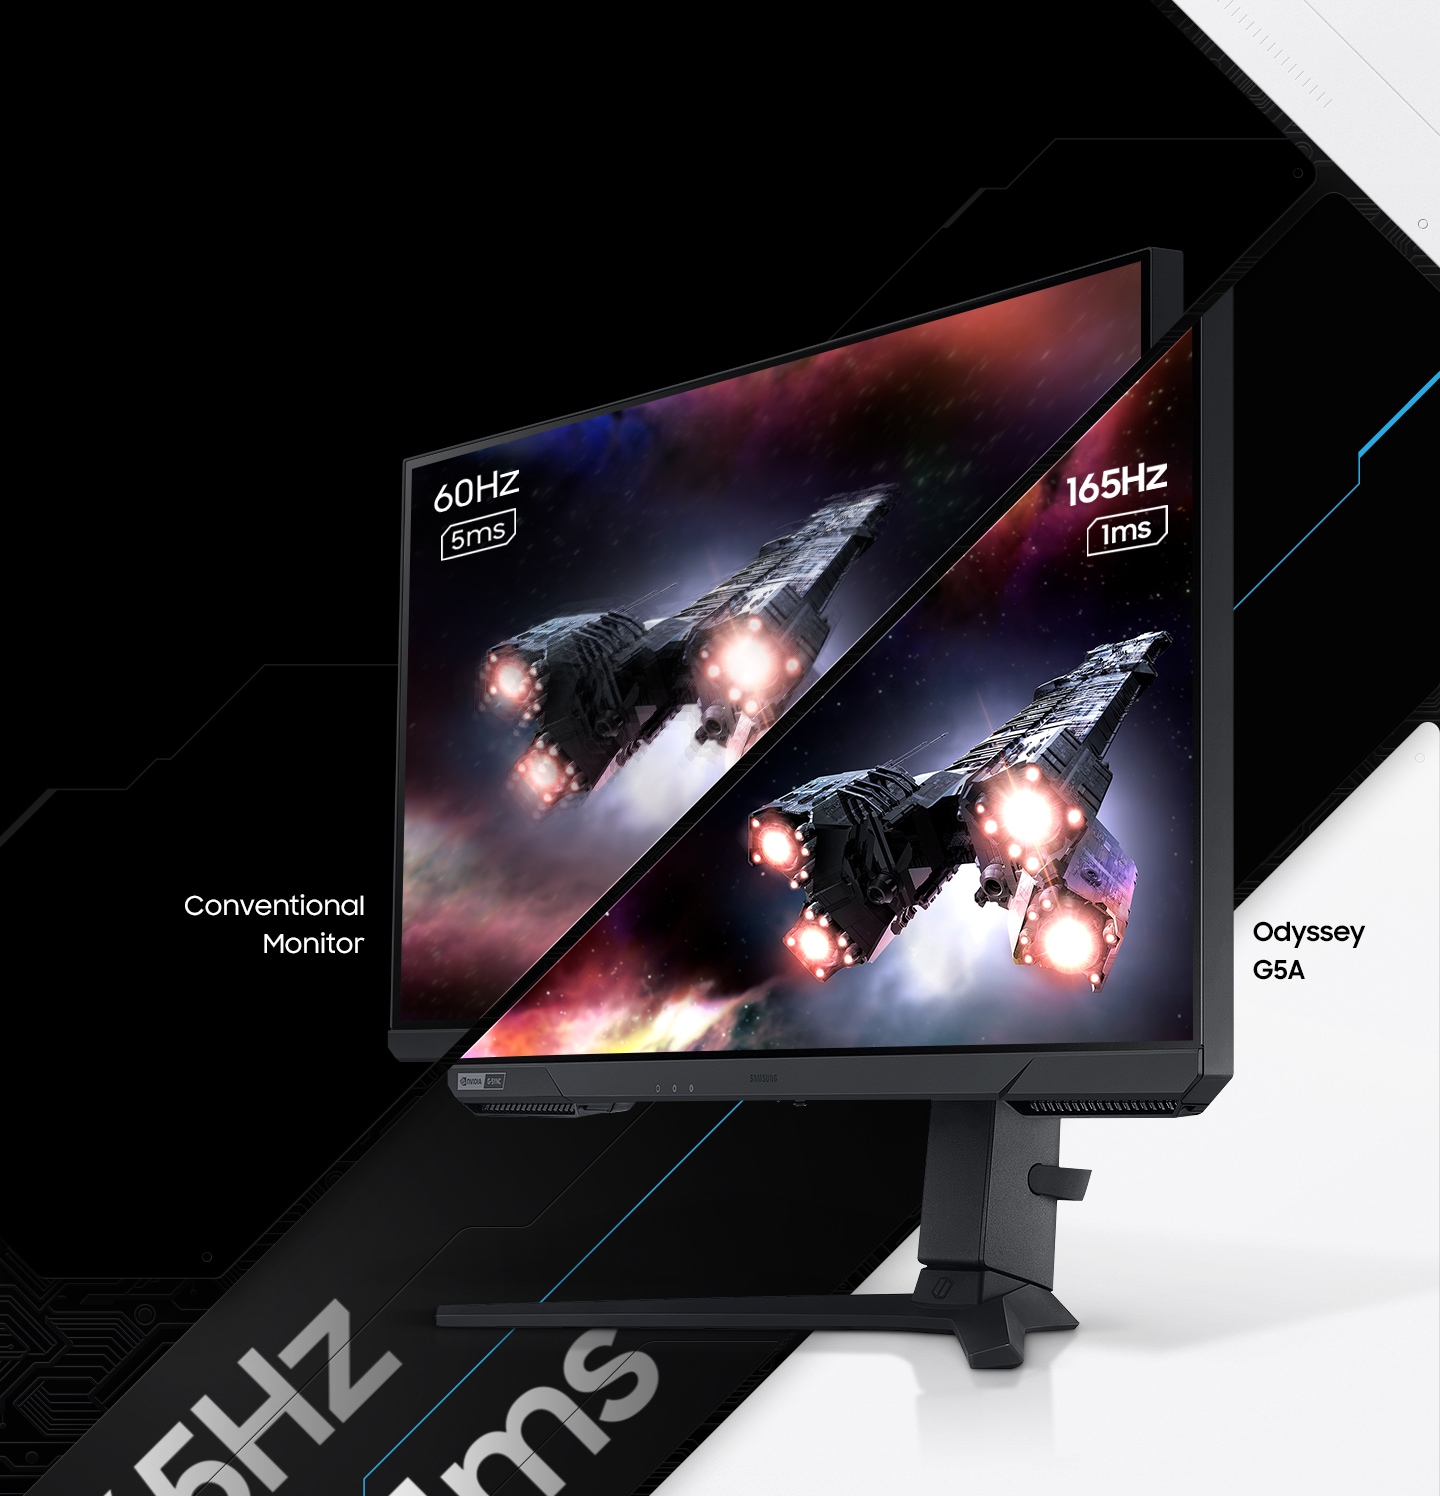 A monitor which is seen from its right side shows two spaceships blasting off into space. The monitor is split in two to show the difference in display quality comparing two different refresh rates and response time, one for conventional monitor with 60Hz and 5ms and the other for Odyssey G5 with 165Hz and 1ms.